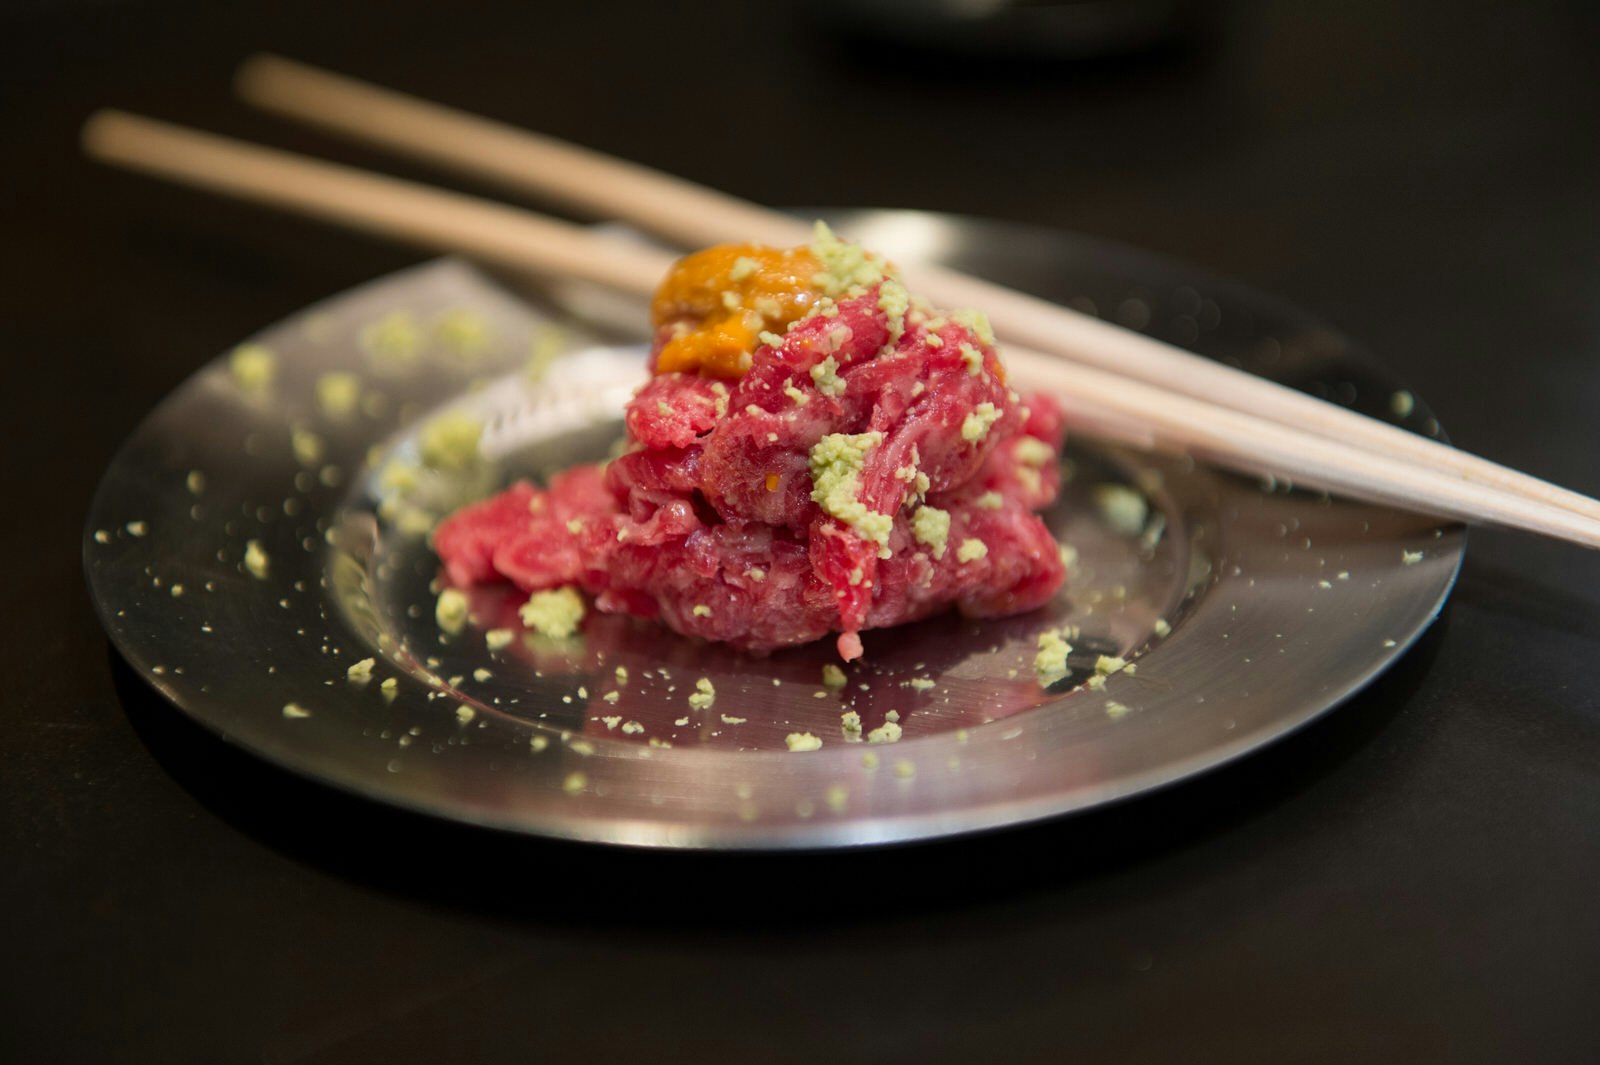 A view of a dish being served during a dinner with Masa Takayama at Masa restaurant in New York. The steak tartare is served on a stainless steel plate, with a sprinkle of wasabi alongside some chopsticks